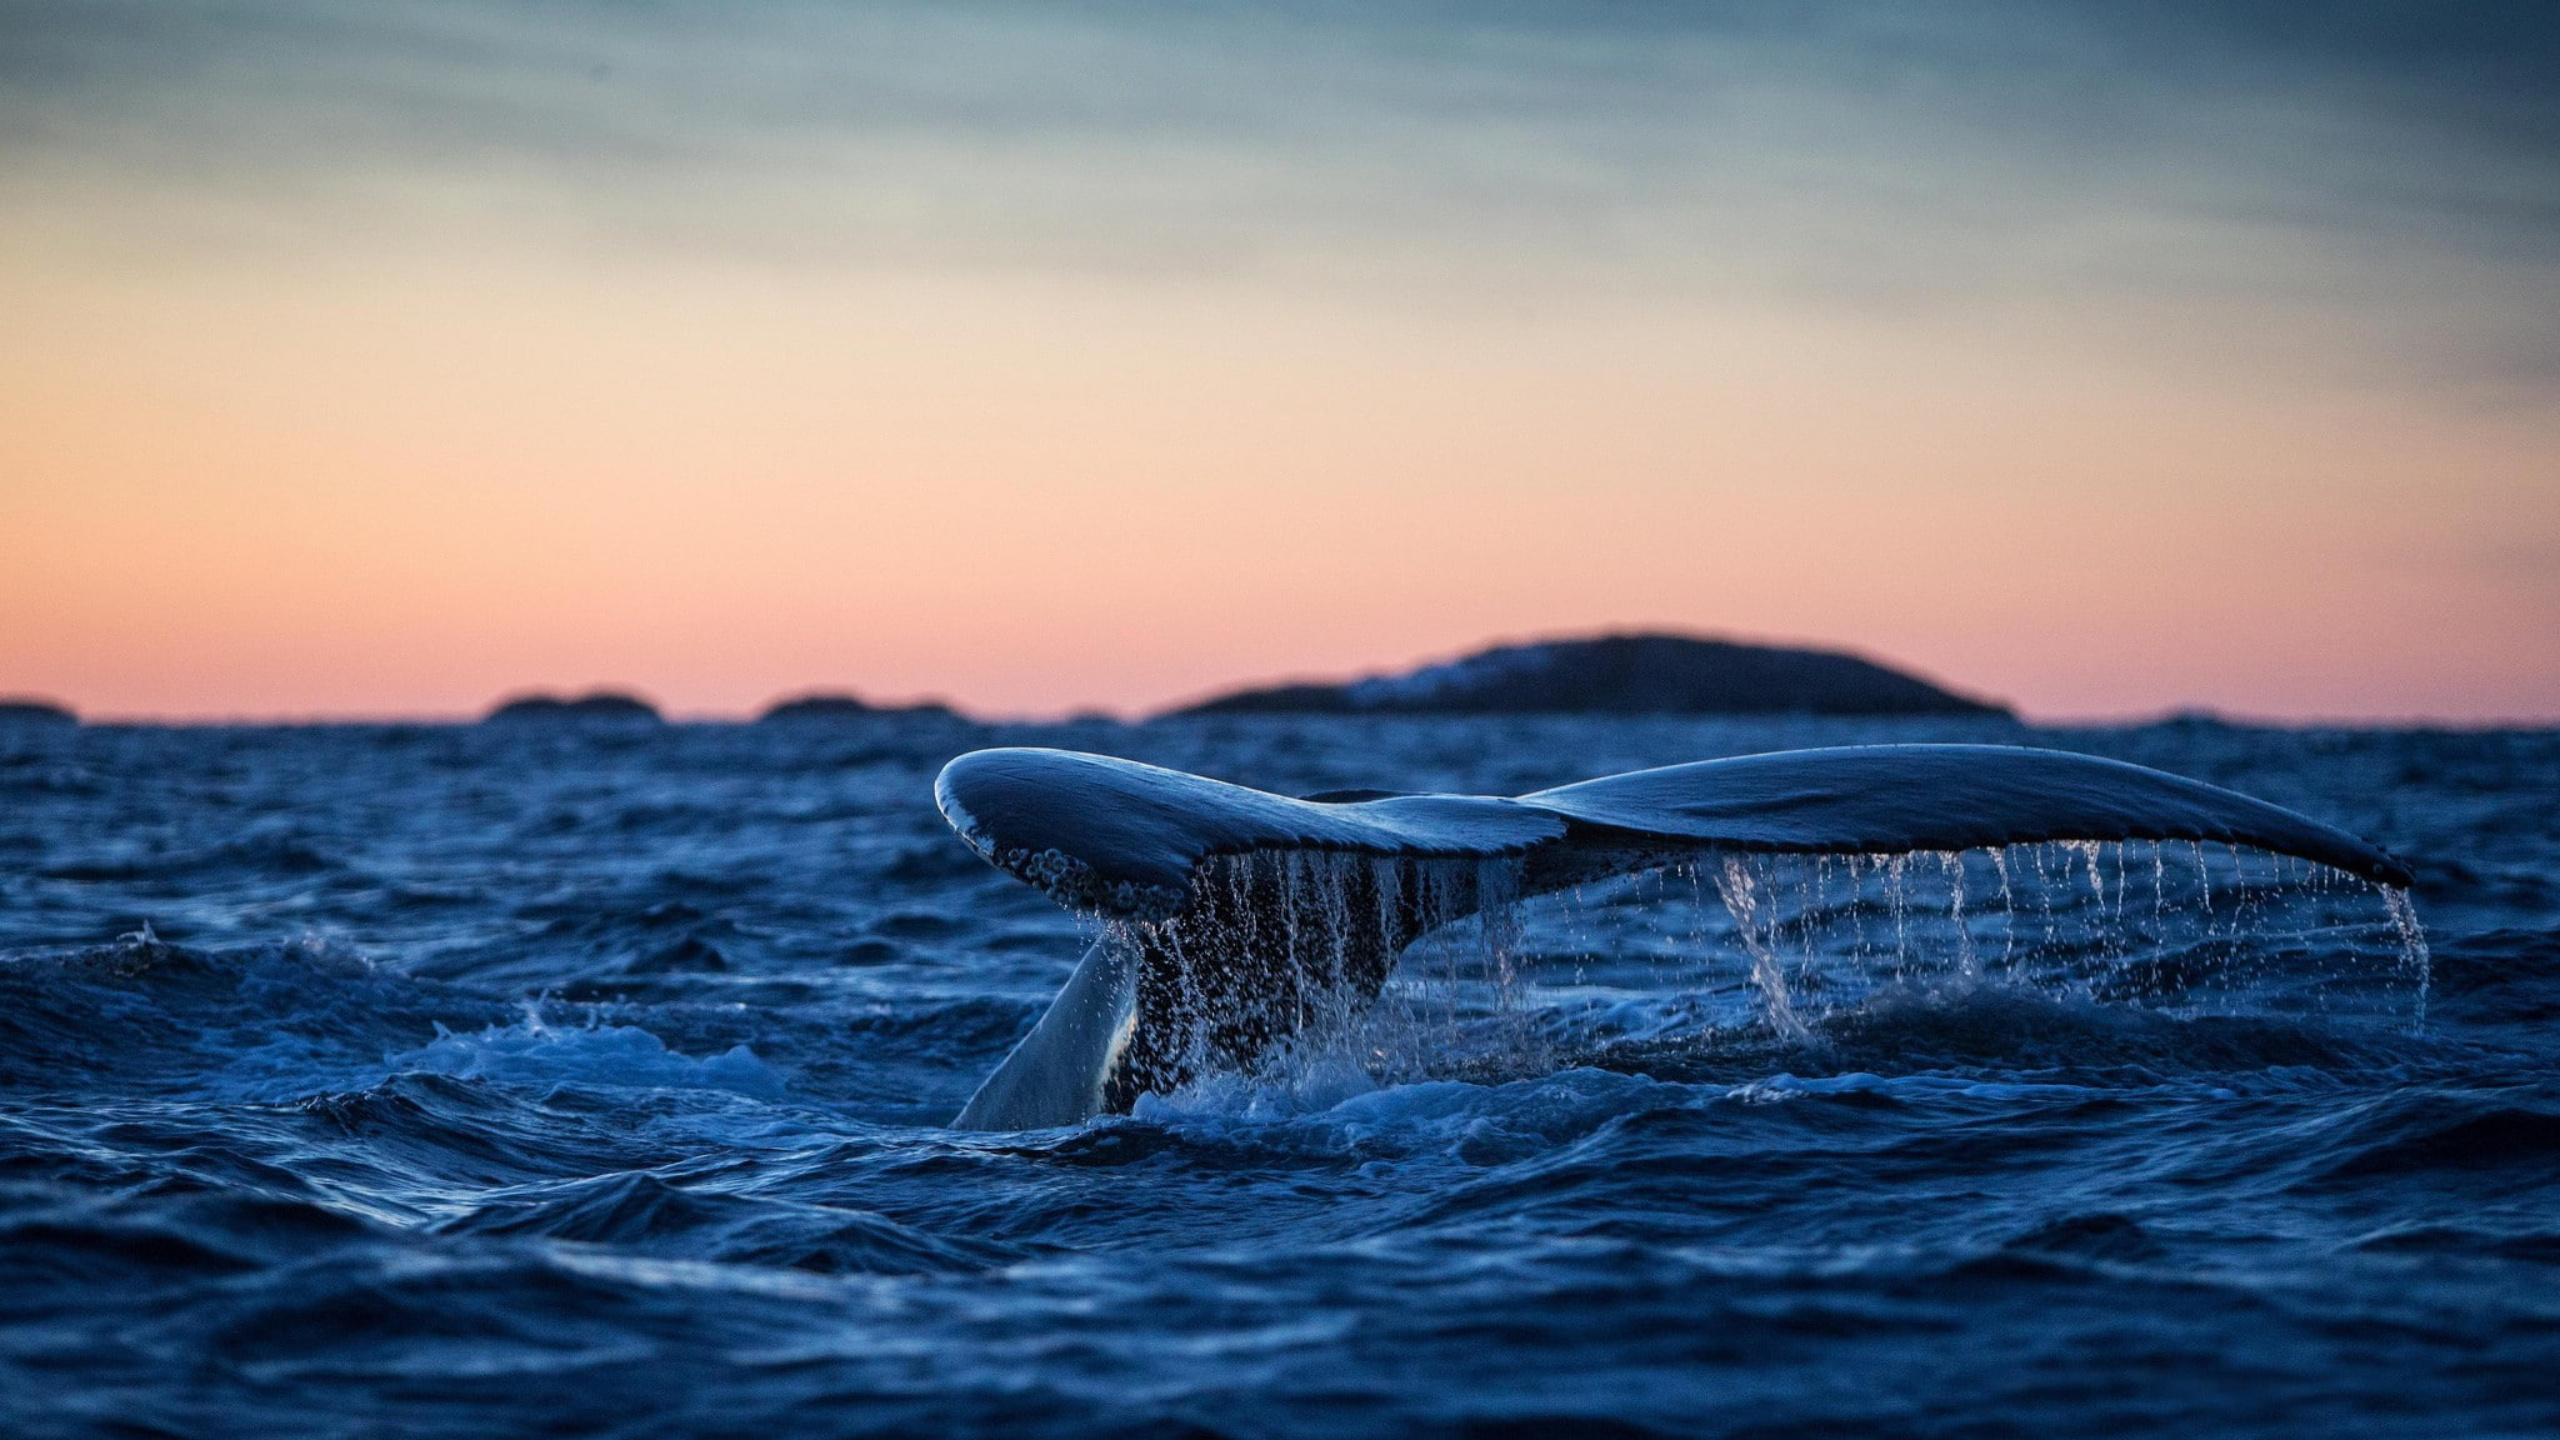 Blue Whale, Whale pictures, Wallpapers, 2560x1440 HD Desktop